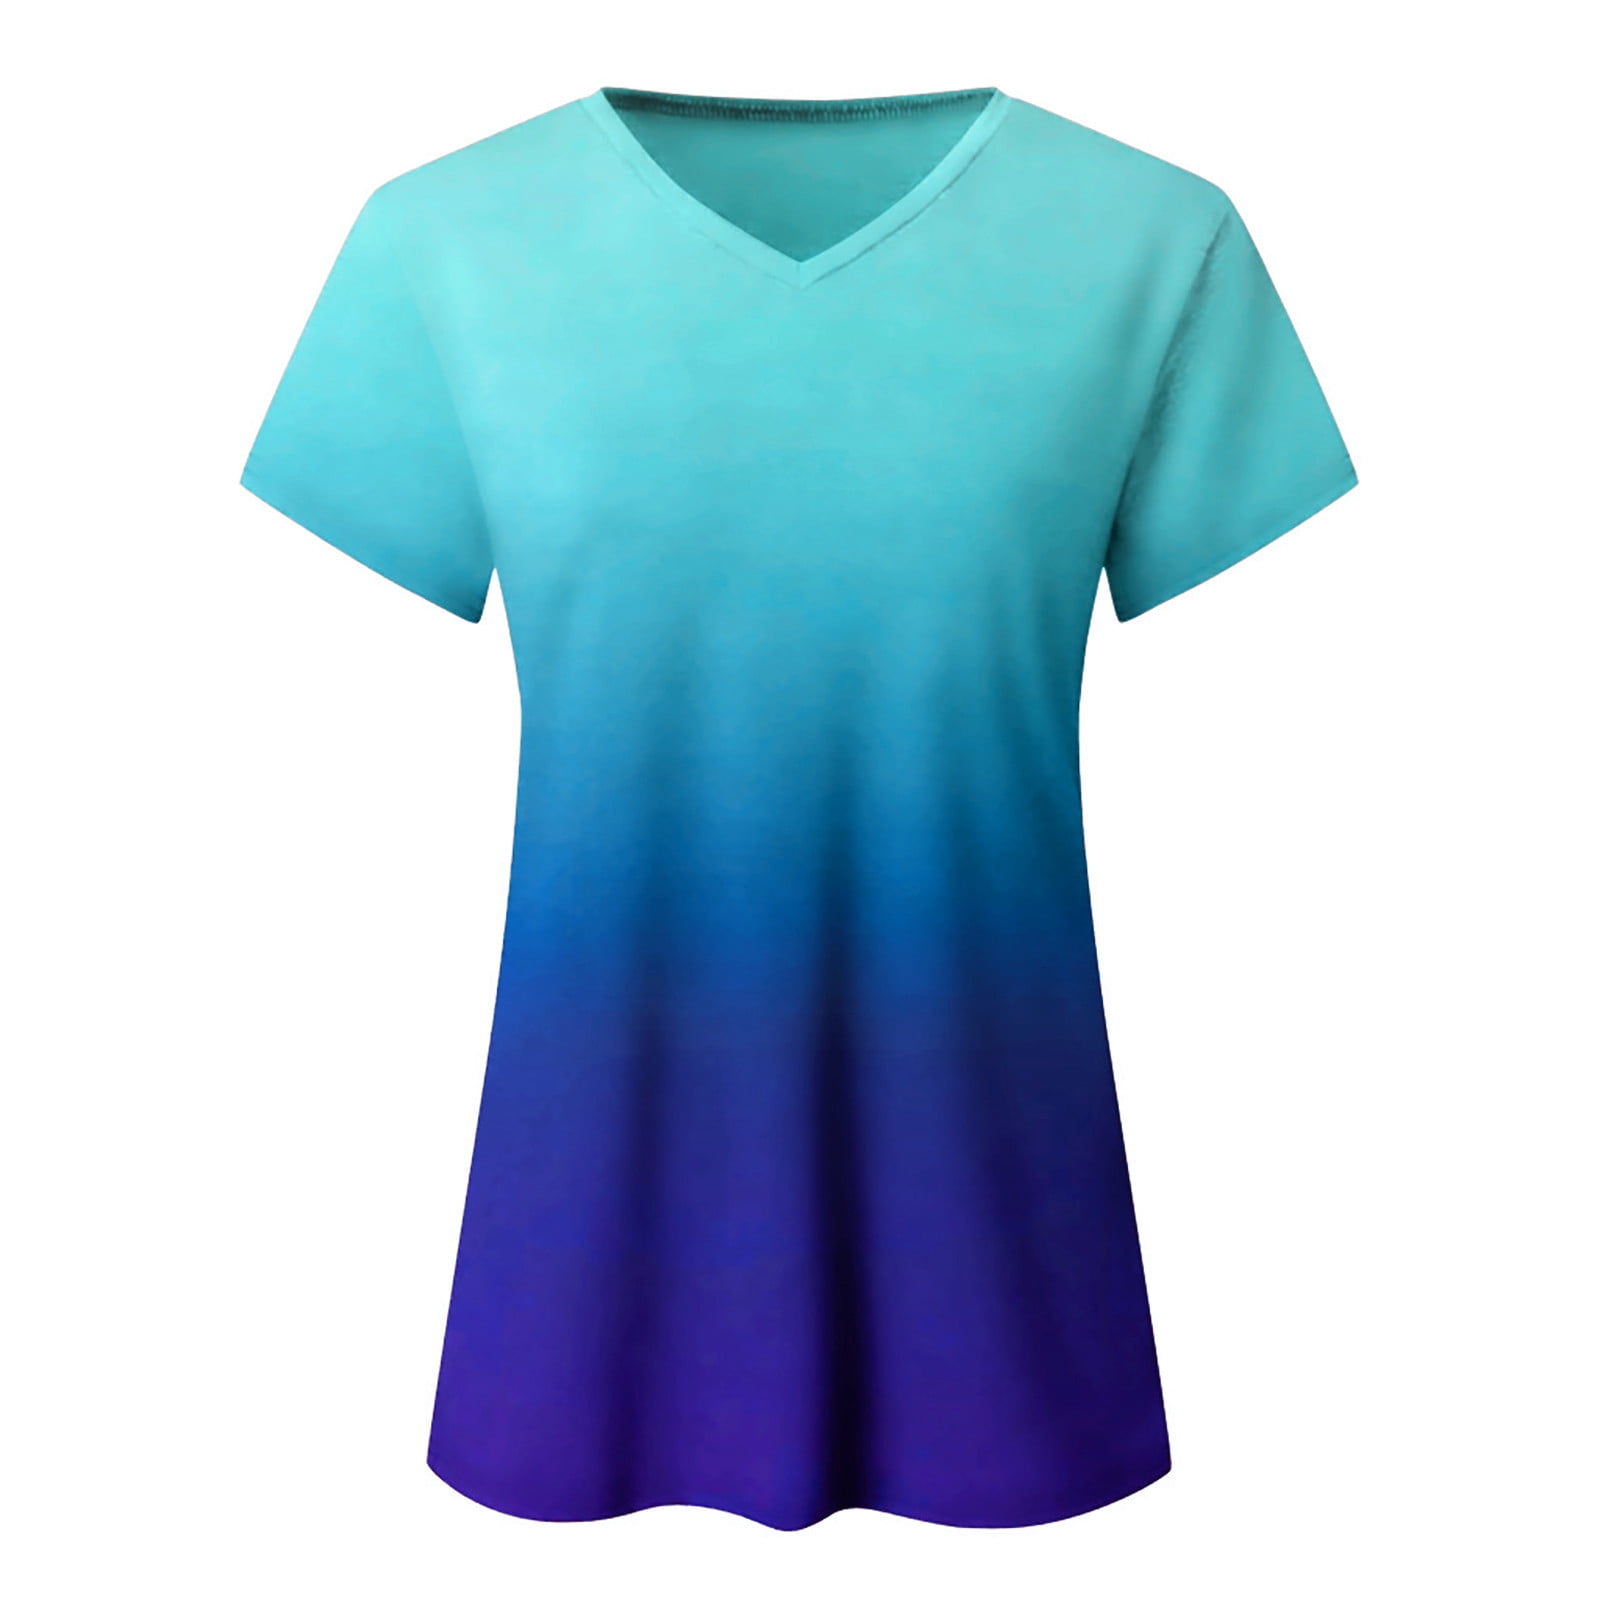 FABIURT Summer Tops for Women,Womens Fashion Gardient Color Short Sleeve V Neck T Shirts Casual Loose Tunic Tee Blouses 